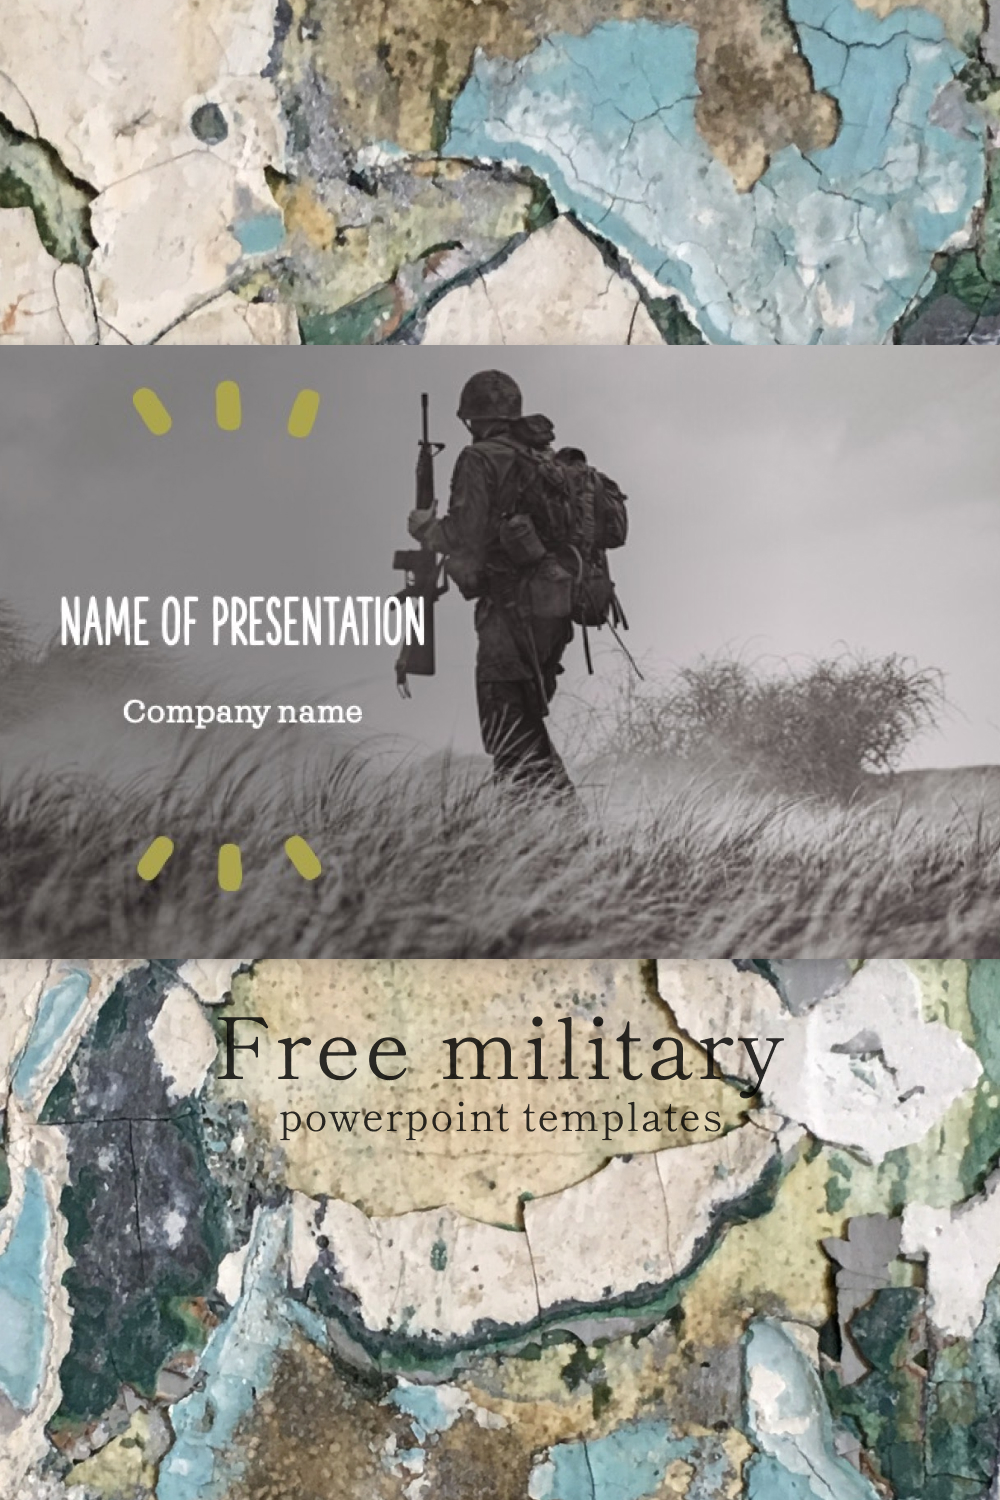 Military powerpoint templates of pinterest.